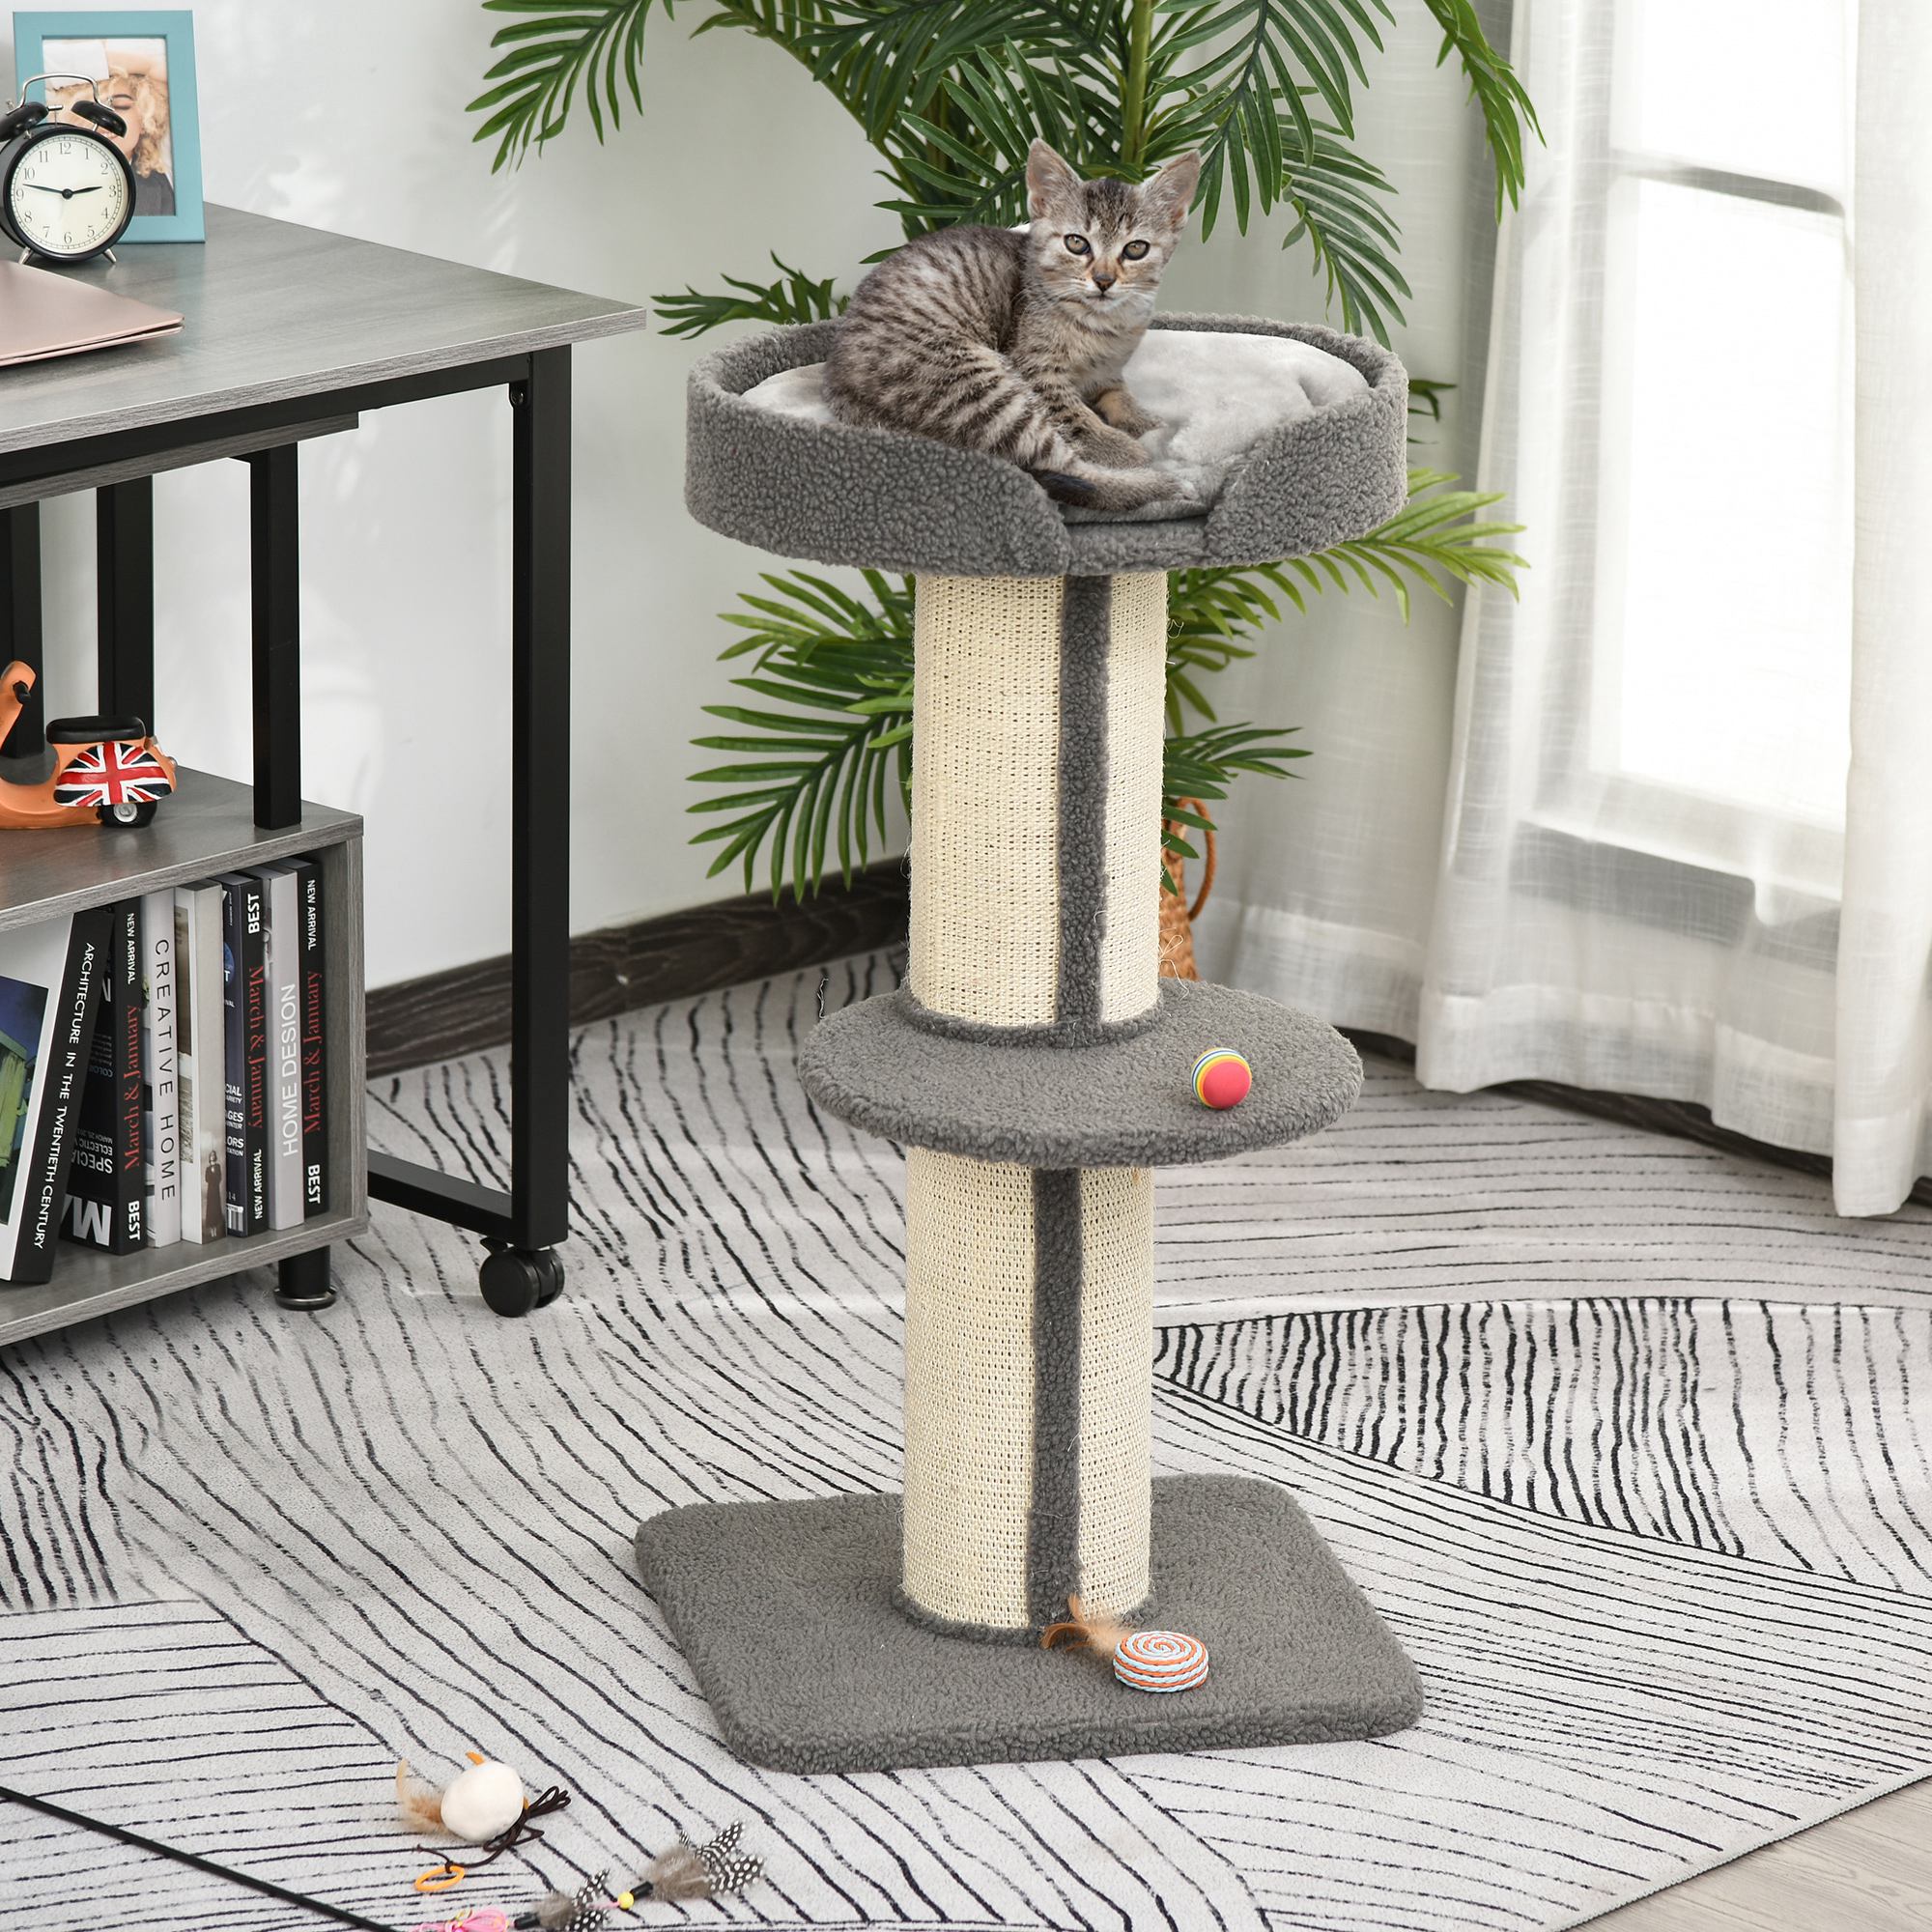 81cm Cat Tree with Sisal Scratching Post, Cat Tower Kitten Activity Center climbing frame with large platform Lamb Cashmere Perch, Grey-1